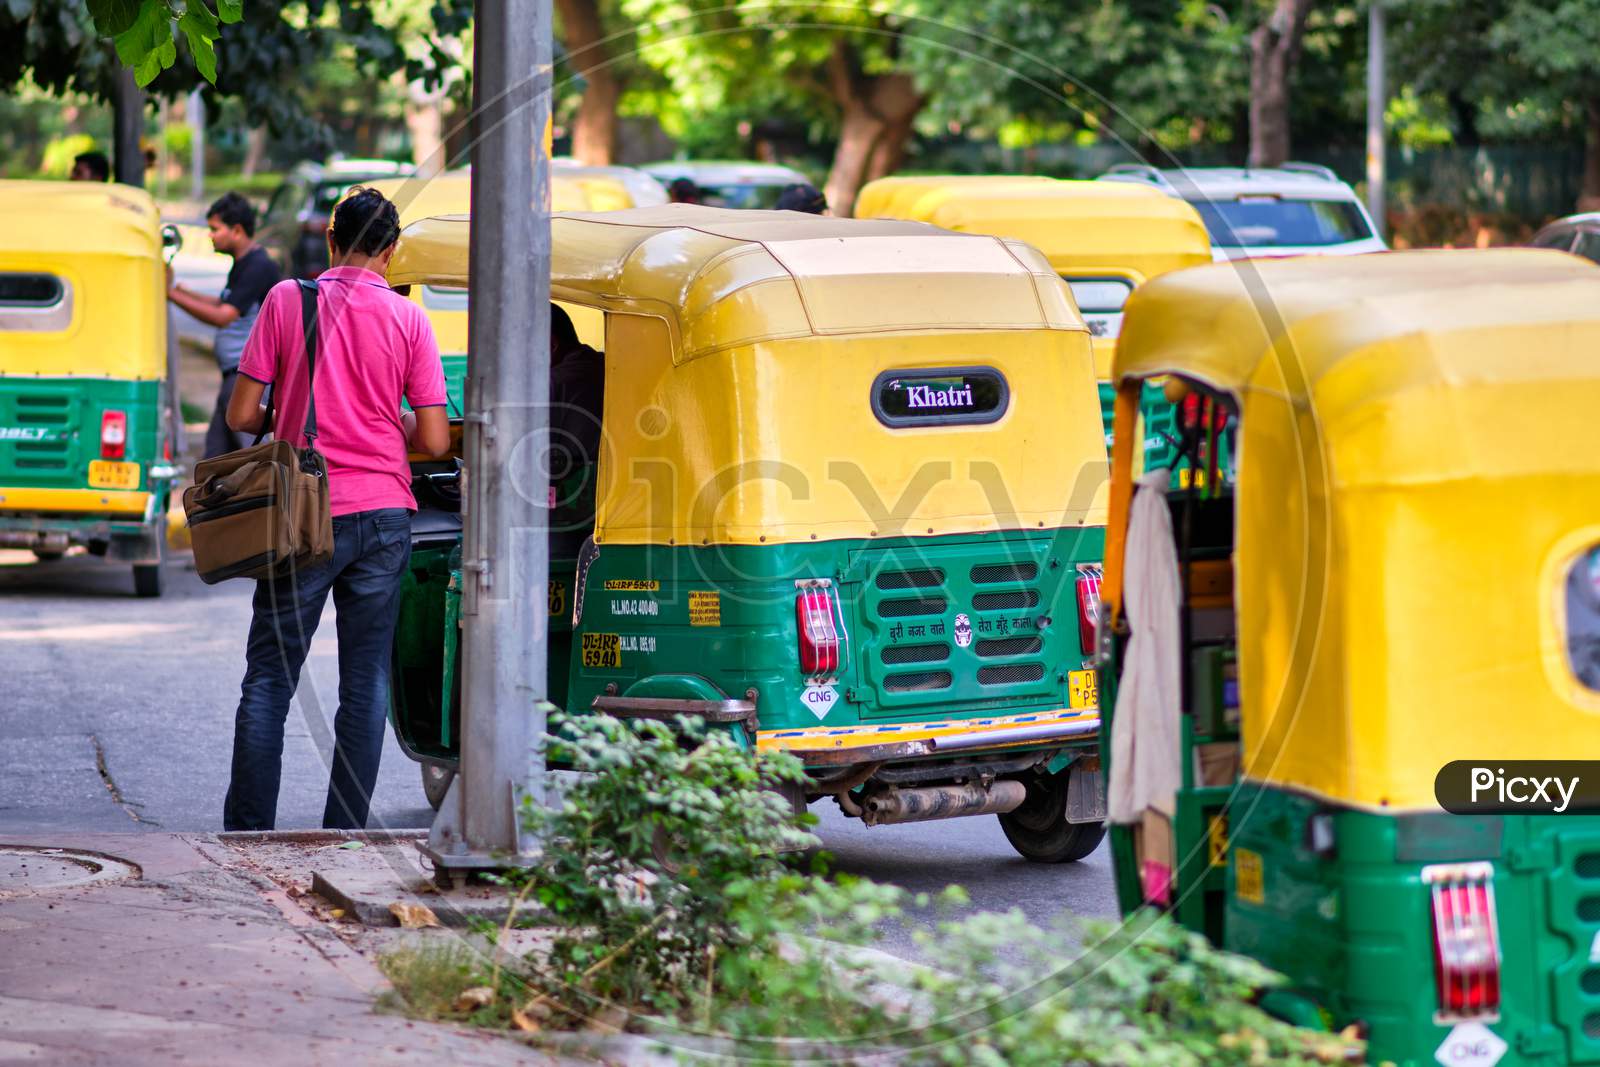 Man Paying The Fare To The Tuk Tuk Driver In The Street In New Delhi, India